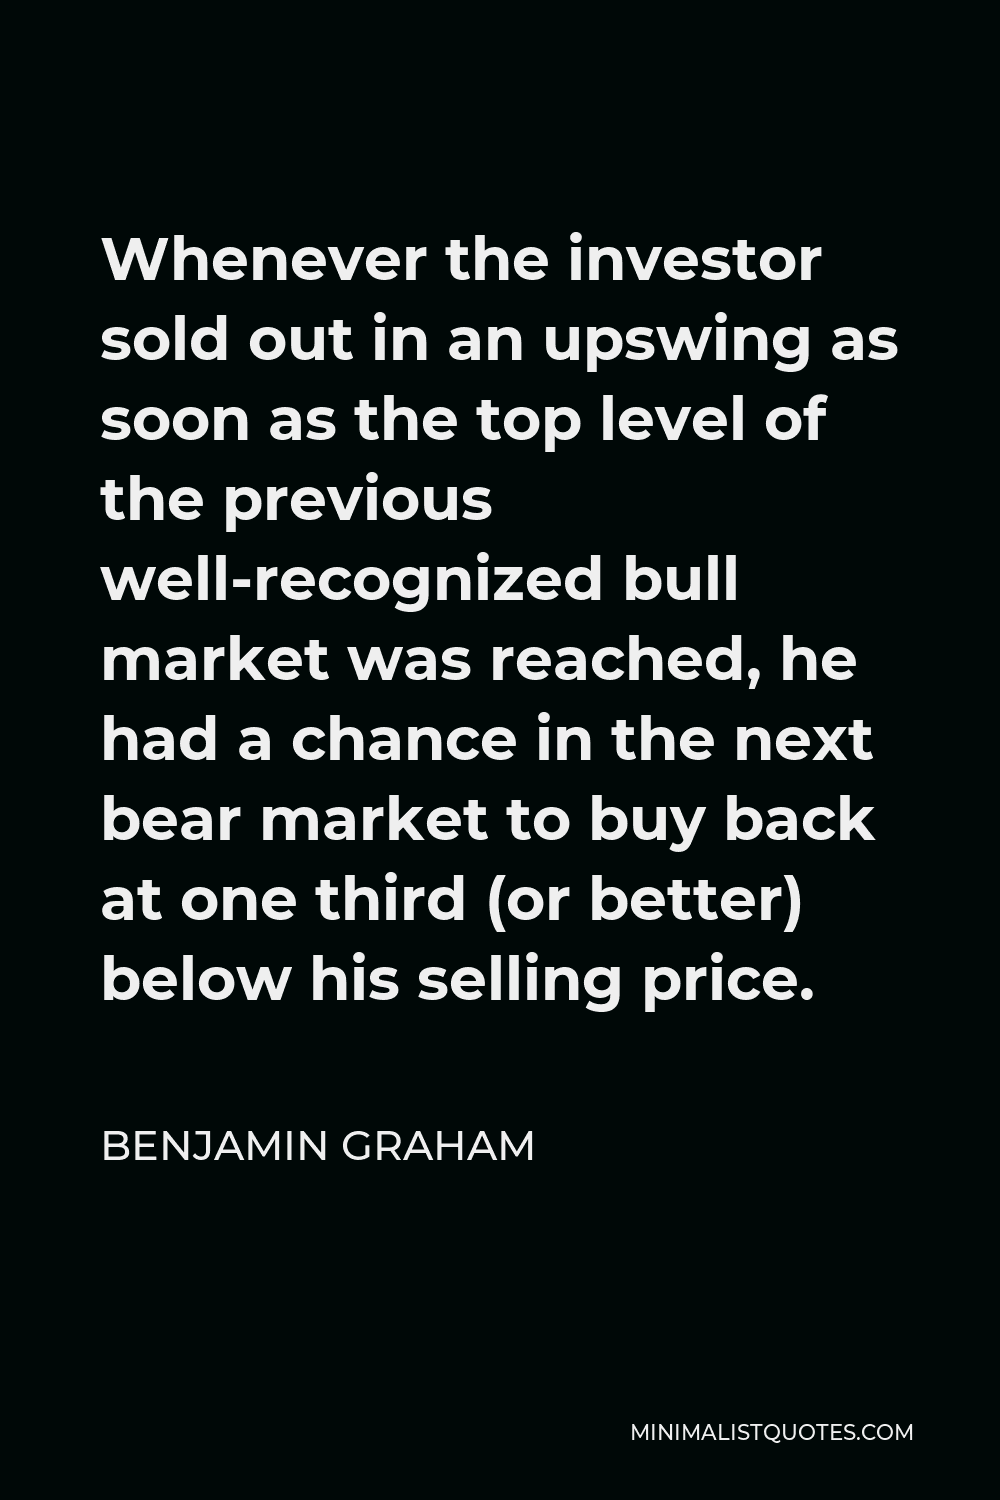 Benjamin Graham Quote - Whenever the investor sold out in an upswing as soon as the top level of the previous well-recognized bull market was reached, he had a chance in the next bear market to buy back at one third (or better) below his selling price.